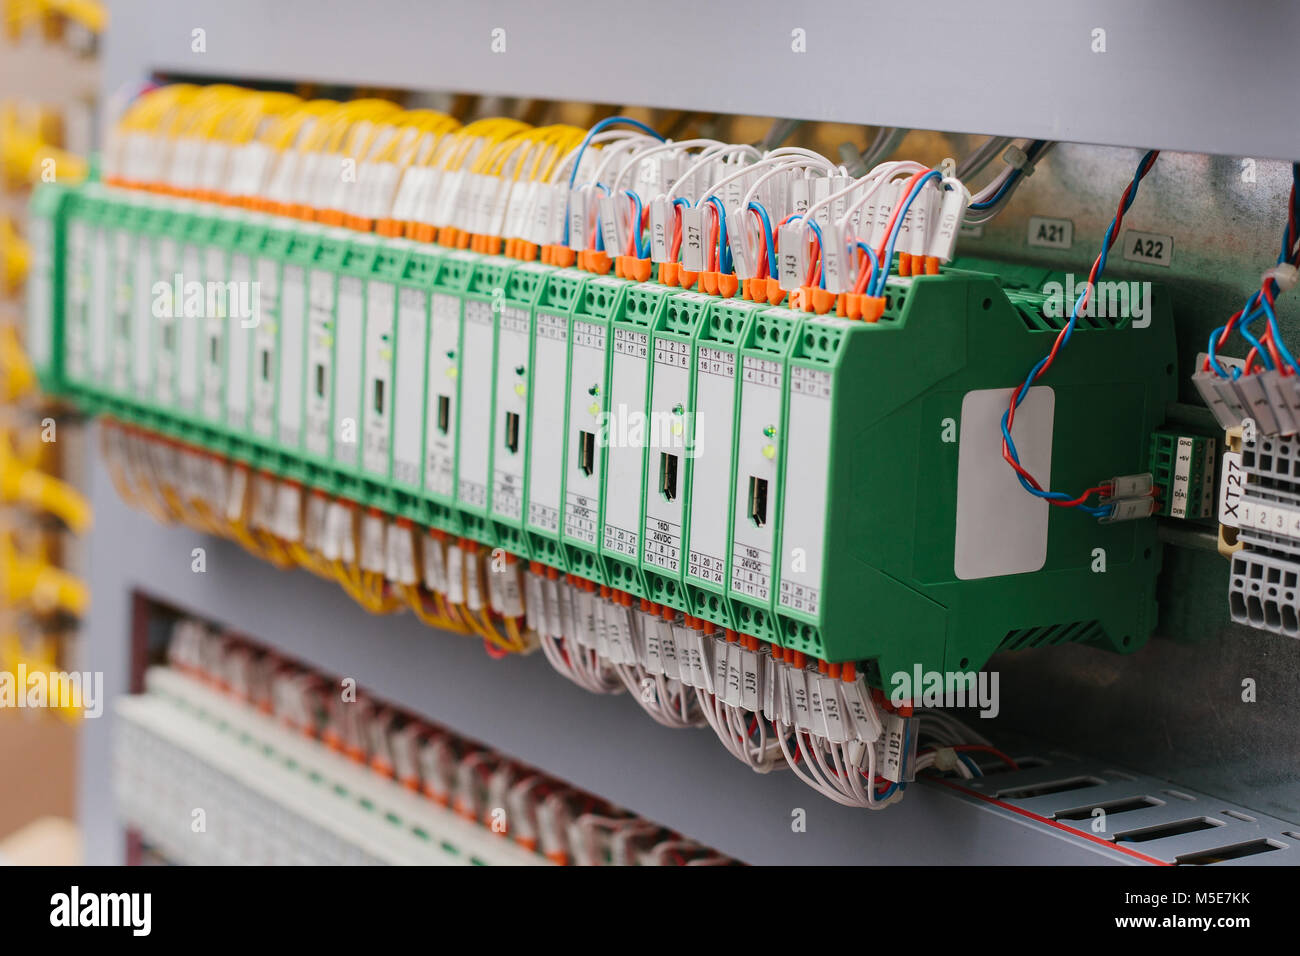 Automated process control systems, power supplies, controller. High-precision equipment for use in the power industry. Stock Photo